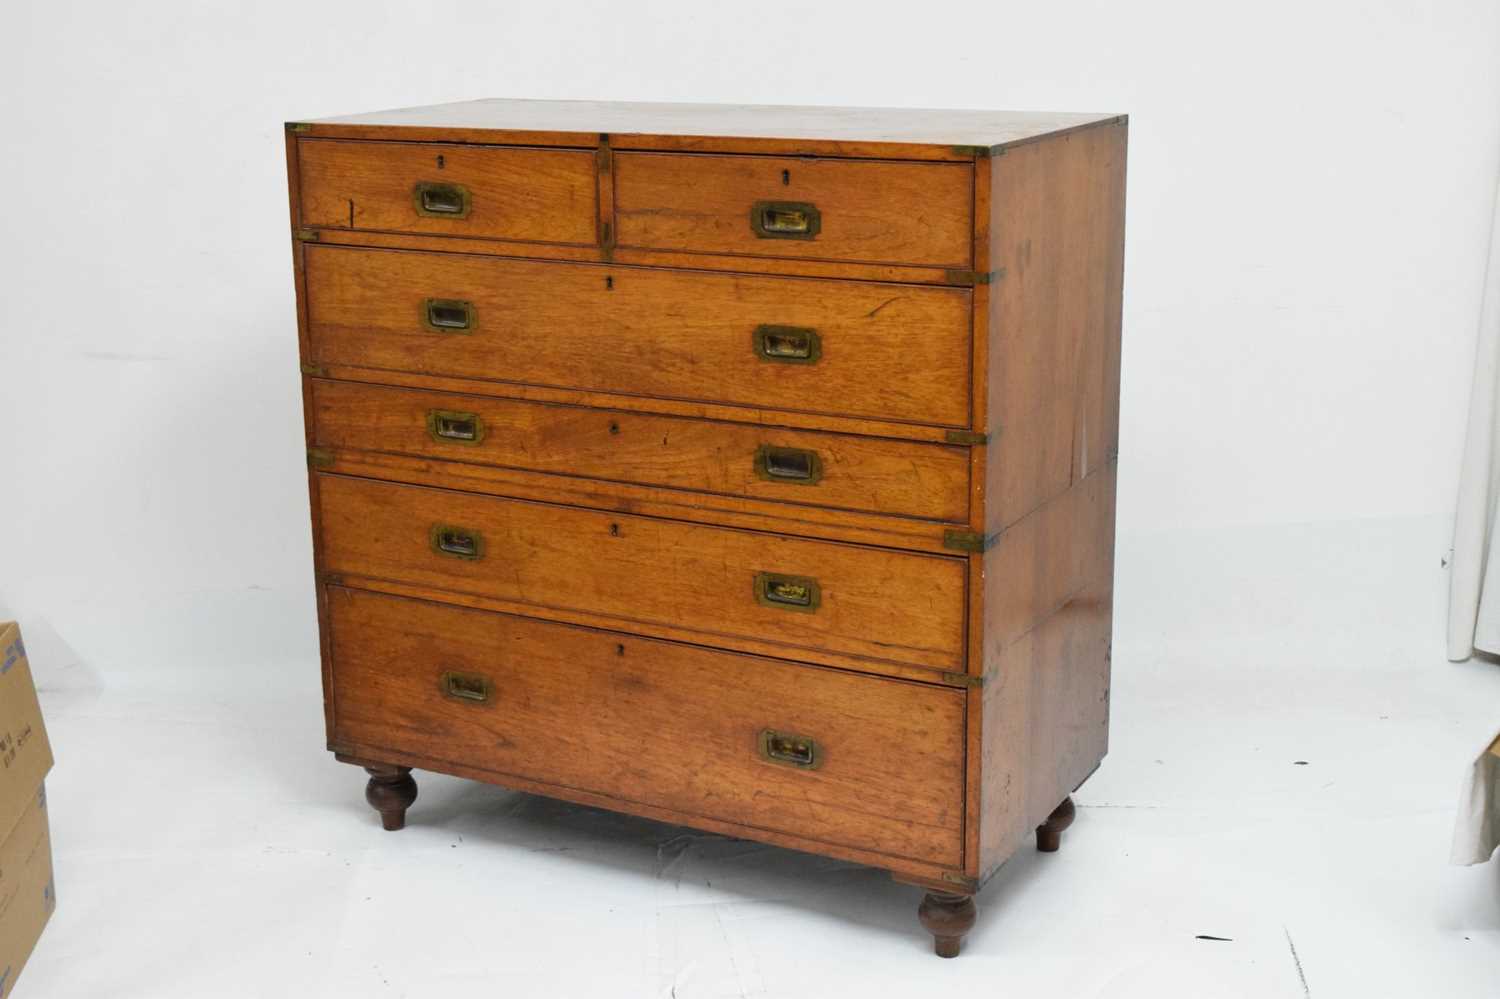 Late 19th century brass-bound teak campaign secretaire chest - Image 8 of 16